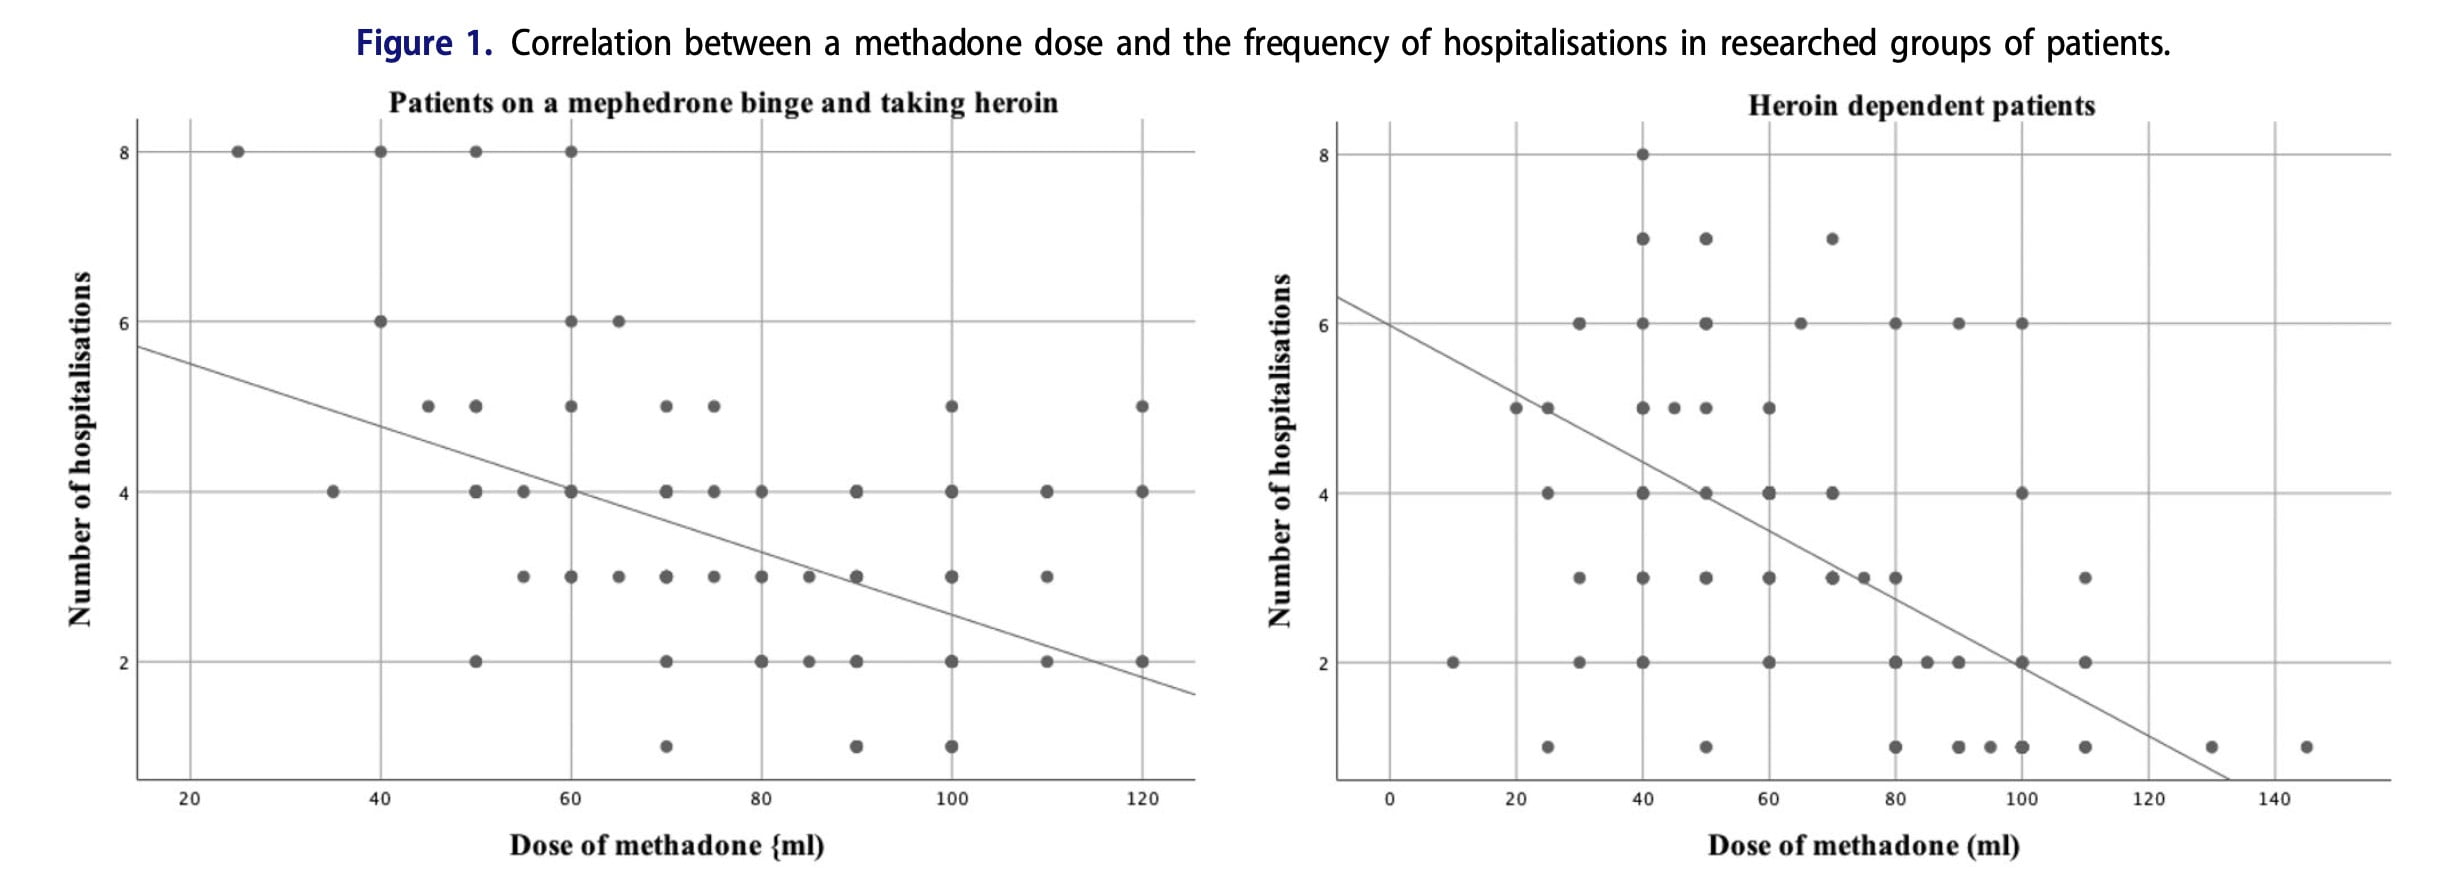 <strong>The effectiveness of the methadone program in treating mephedrone addiction</strong>